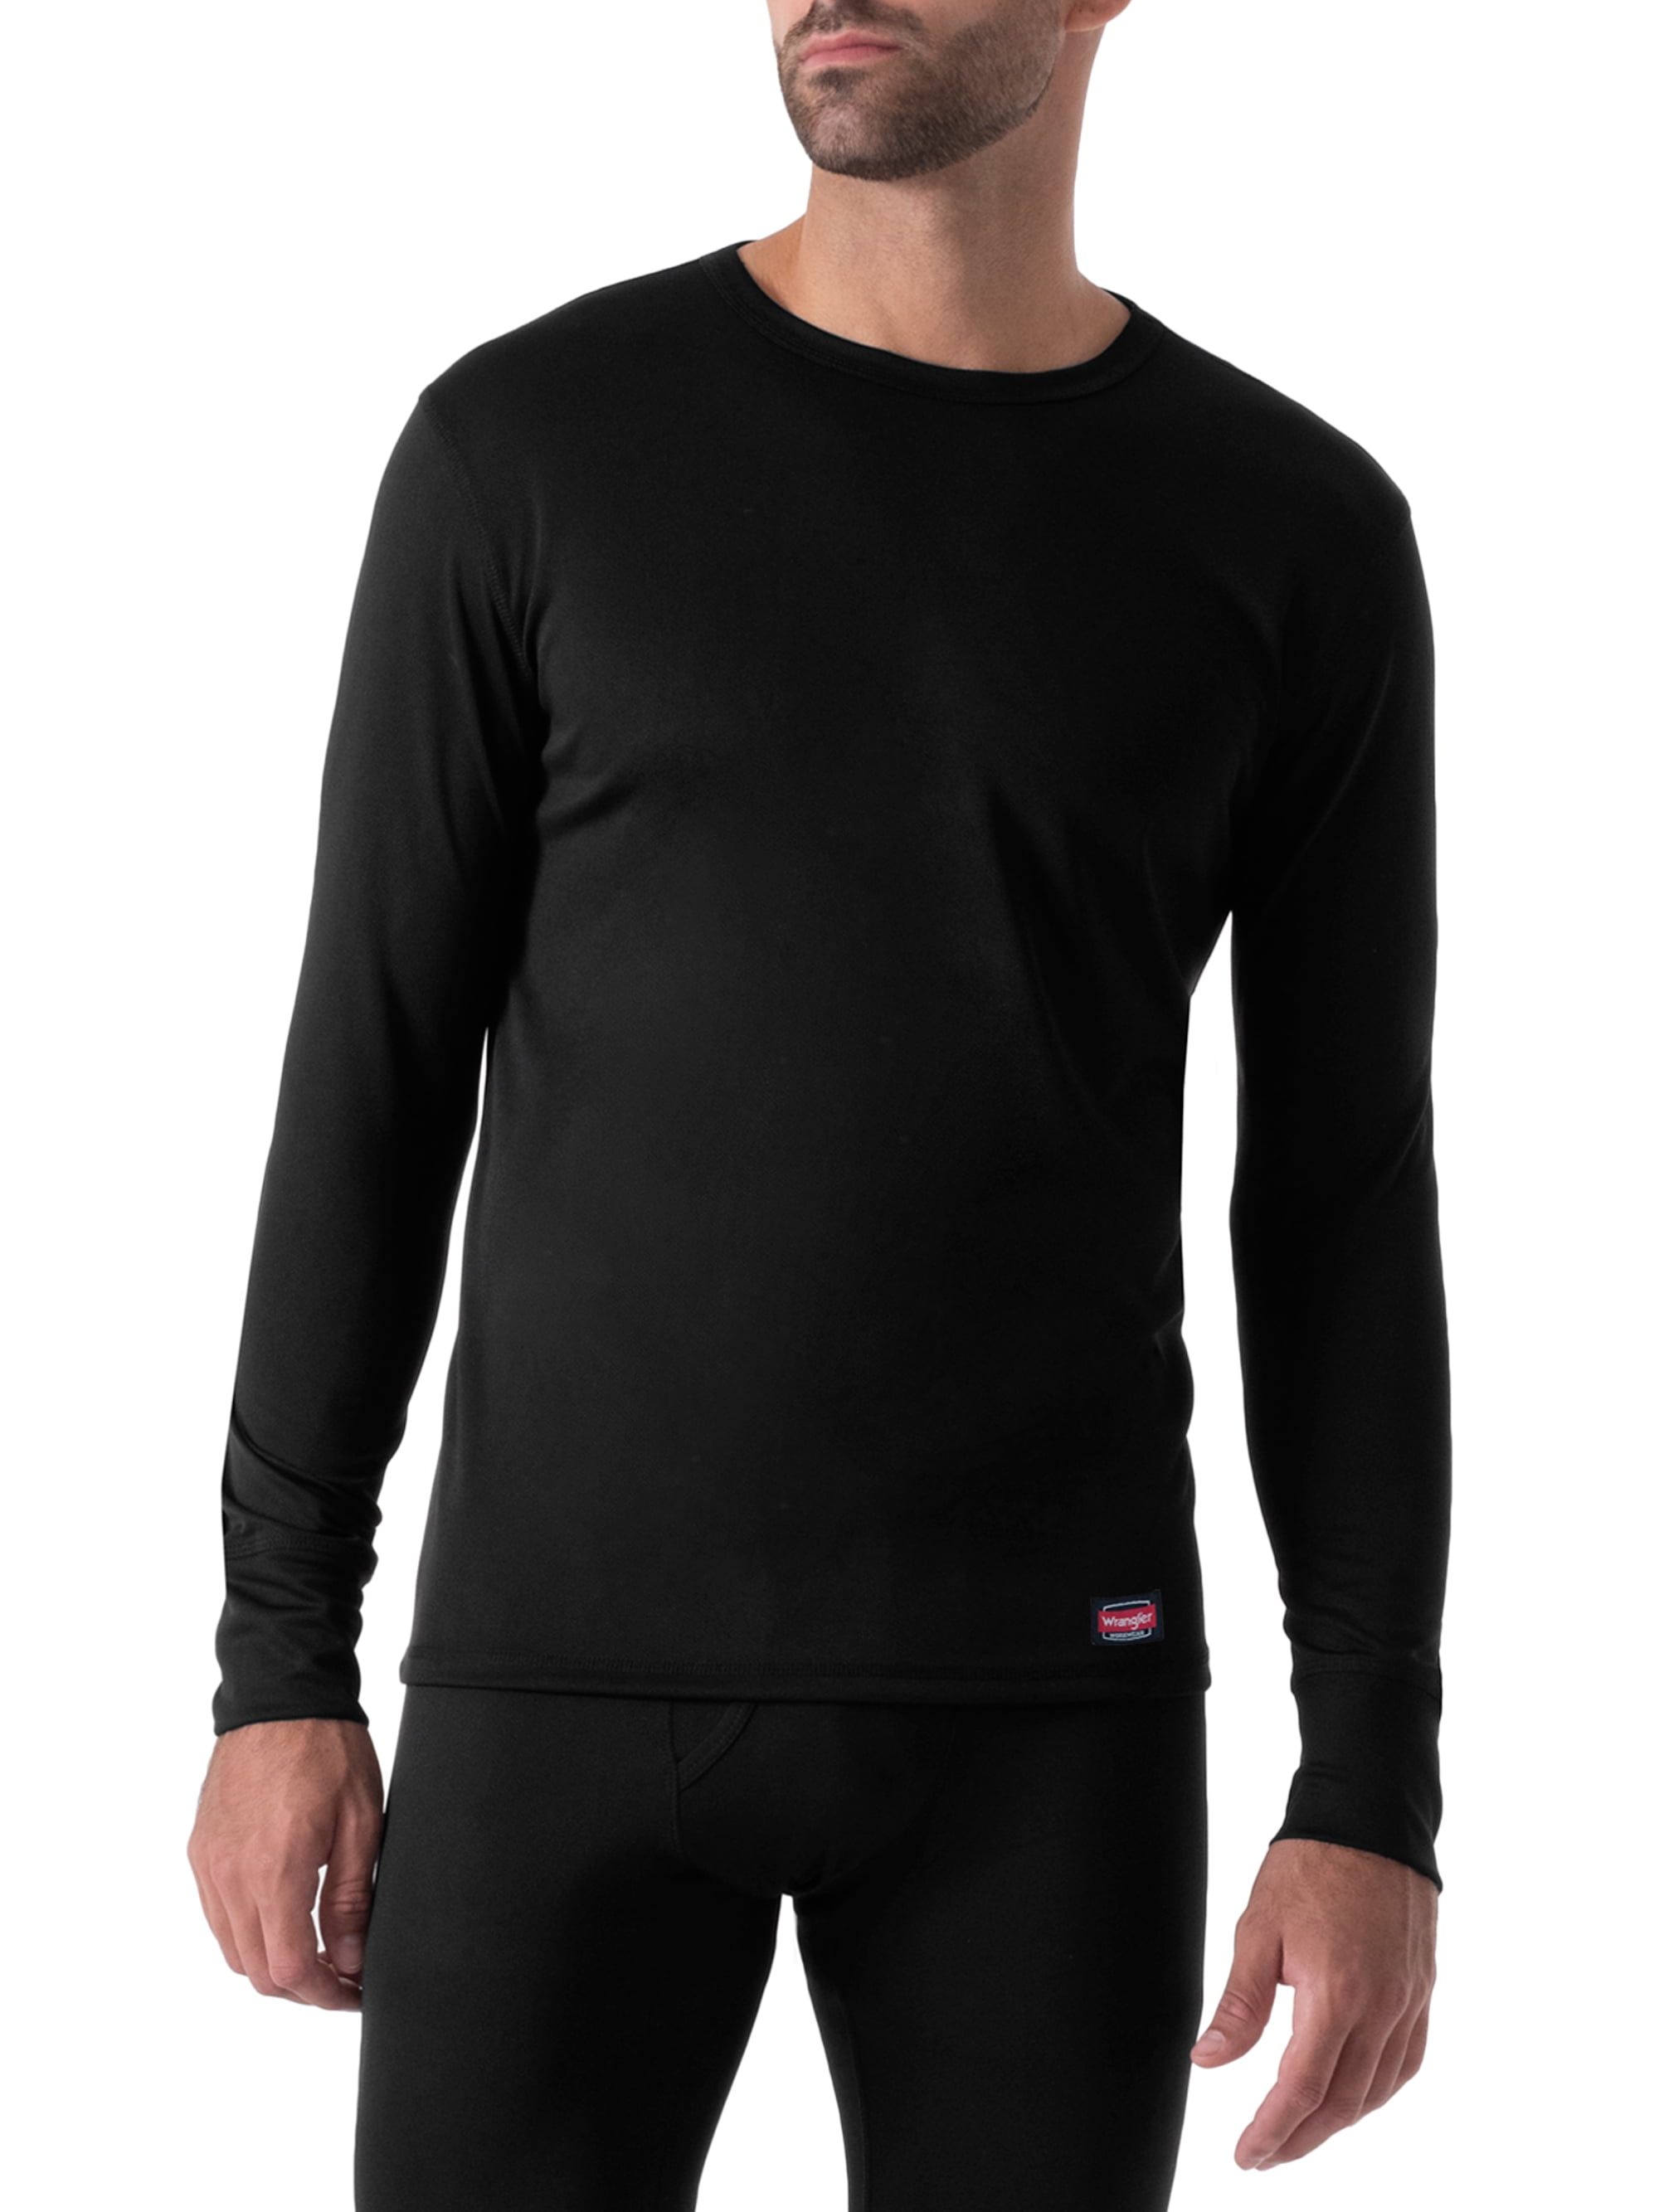 L $11.99 S Russell Thermaforce Boys' Performance Baselayer Set Choice:  XS M 